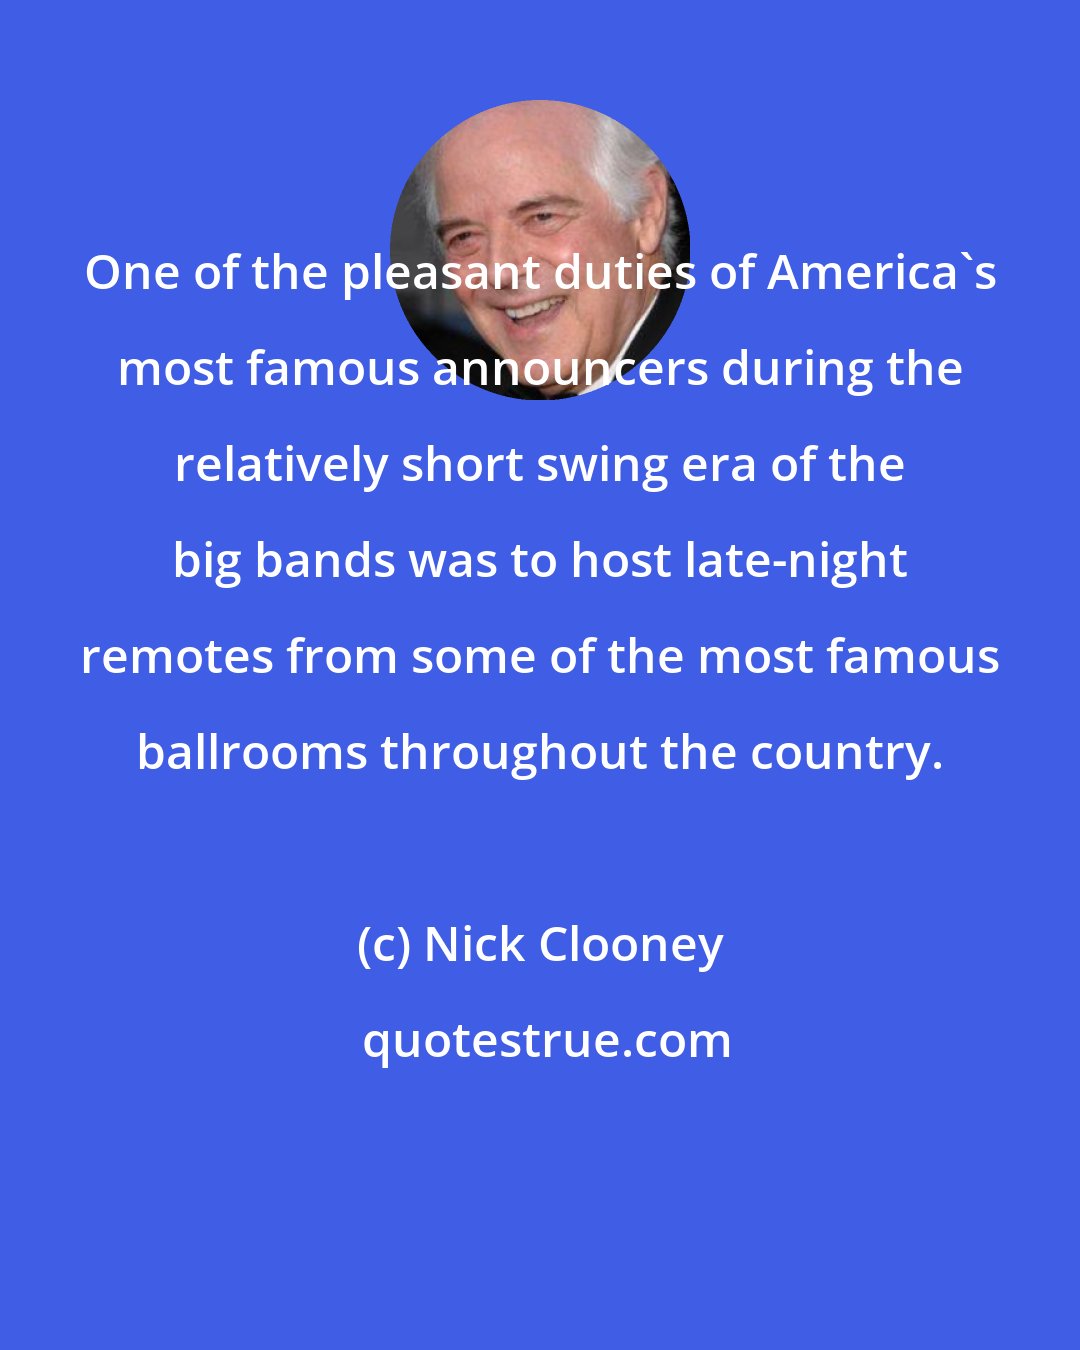 Nick Clooney: One of the pleasant duties of America's most famous announcers during the relatively short swing era of the big bands was to host late-night remotes from some of the most famous ballrooms throughout the country.